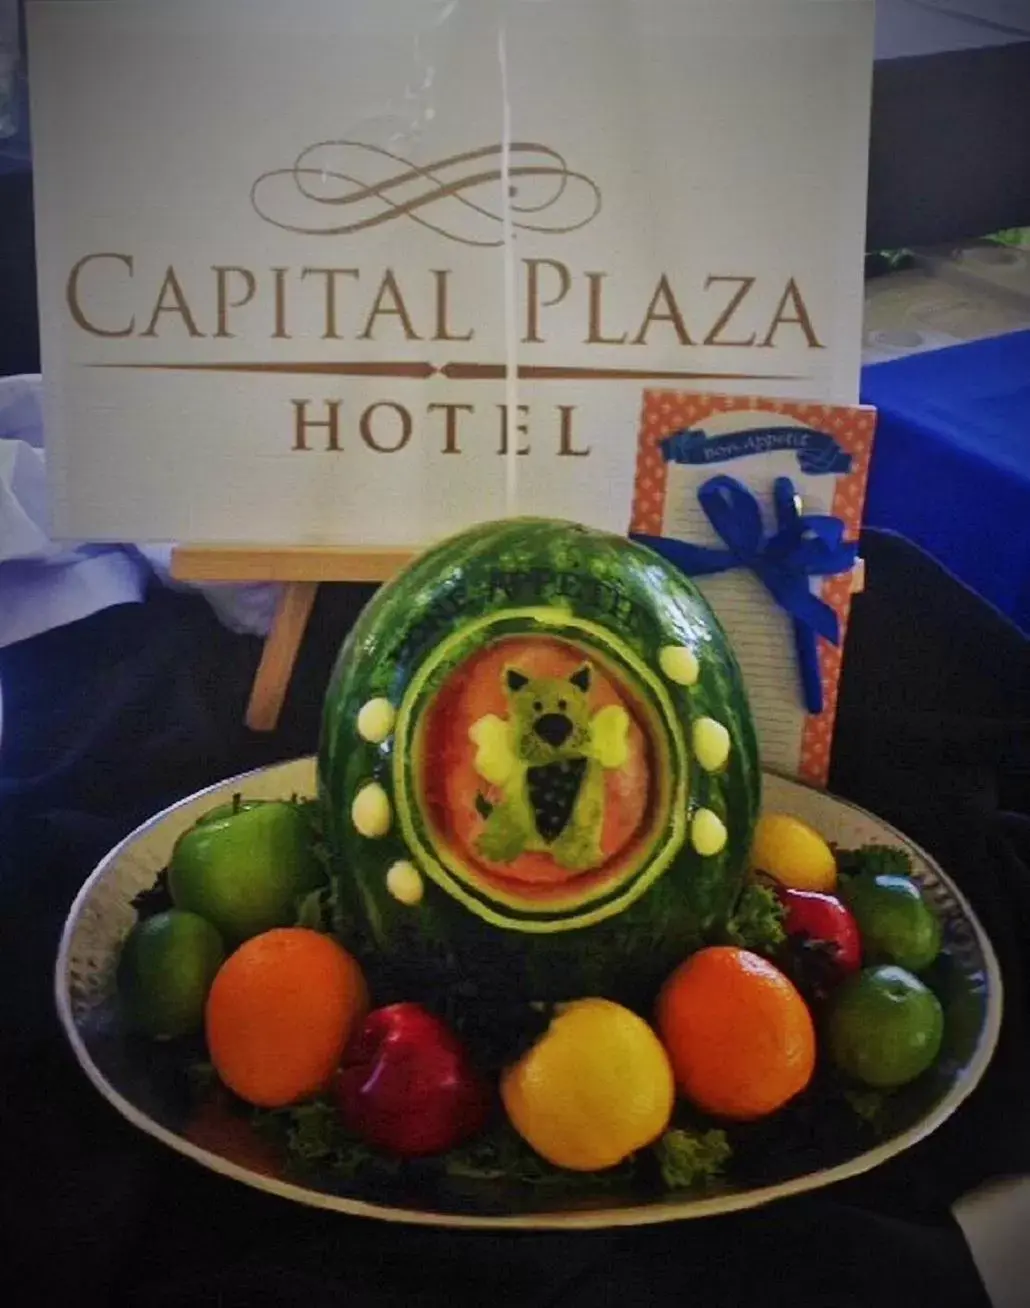 Property logo or sign in Capital Plaza Hotel